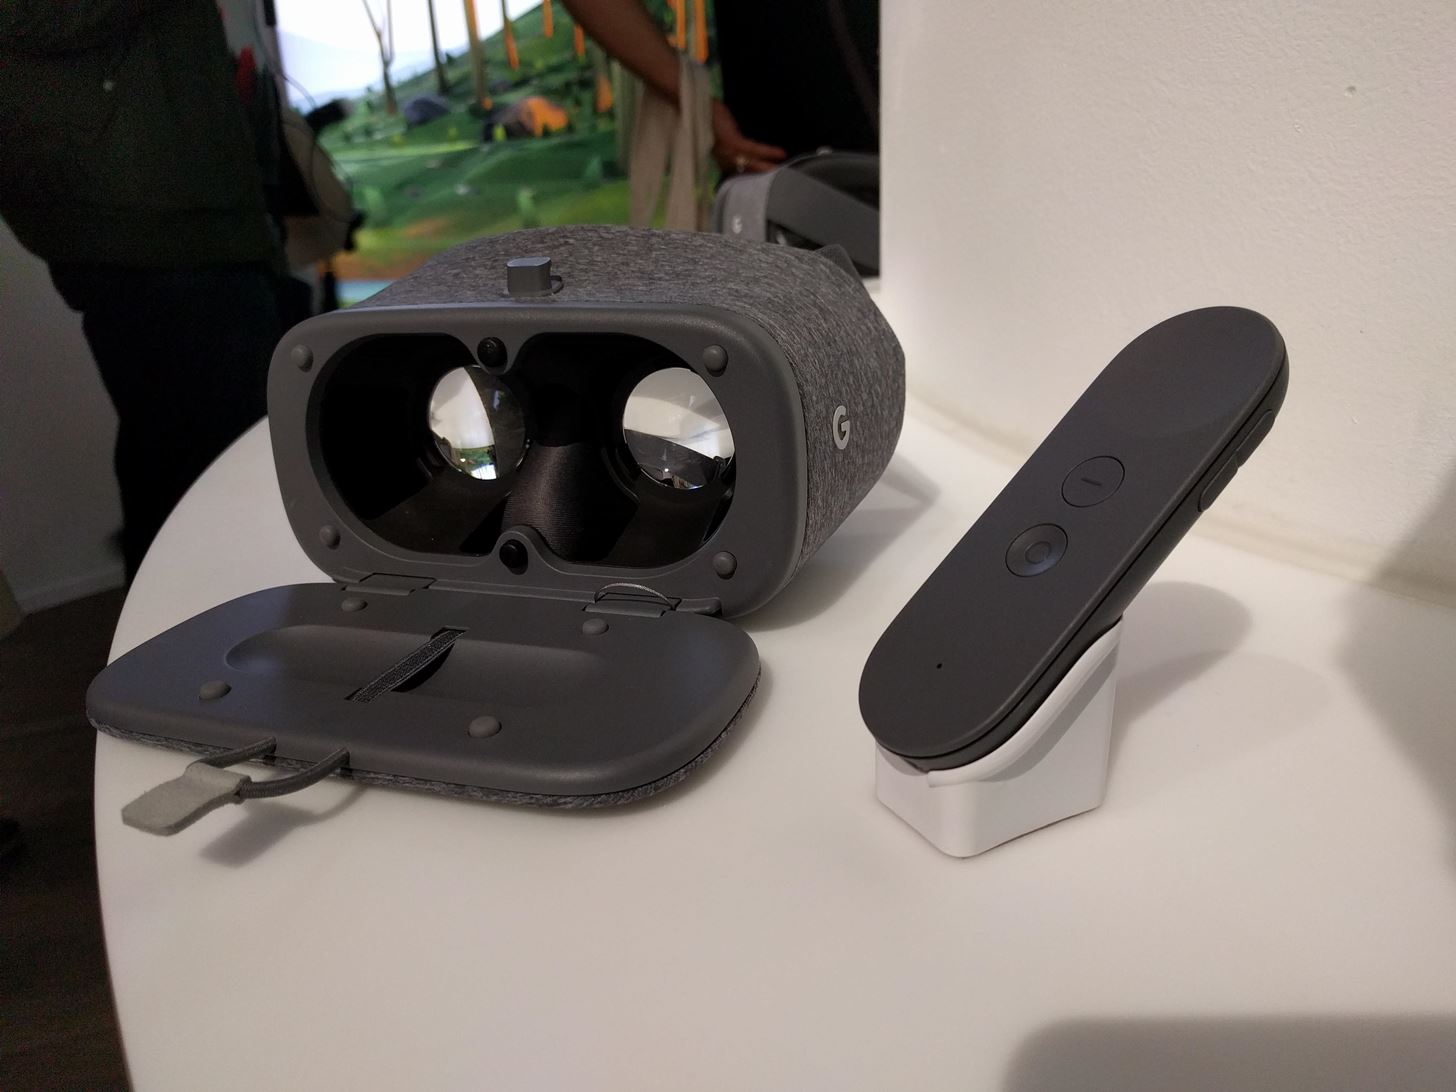 Hands-on: Google's Daydream View Feels Like a Hot & Stiff Pair of Sweatpants on Your Face